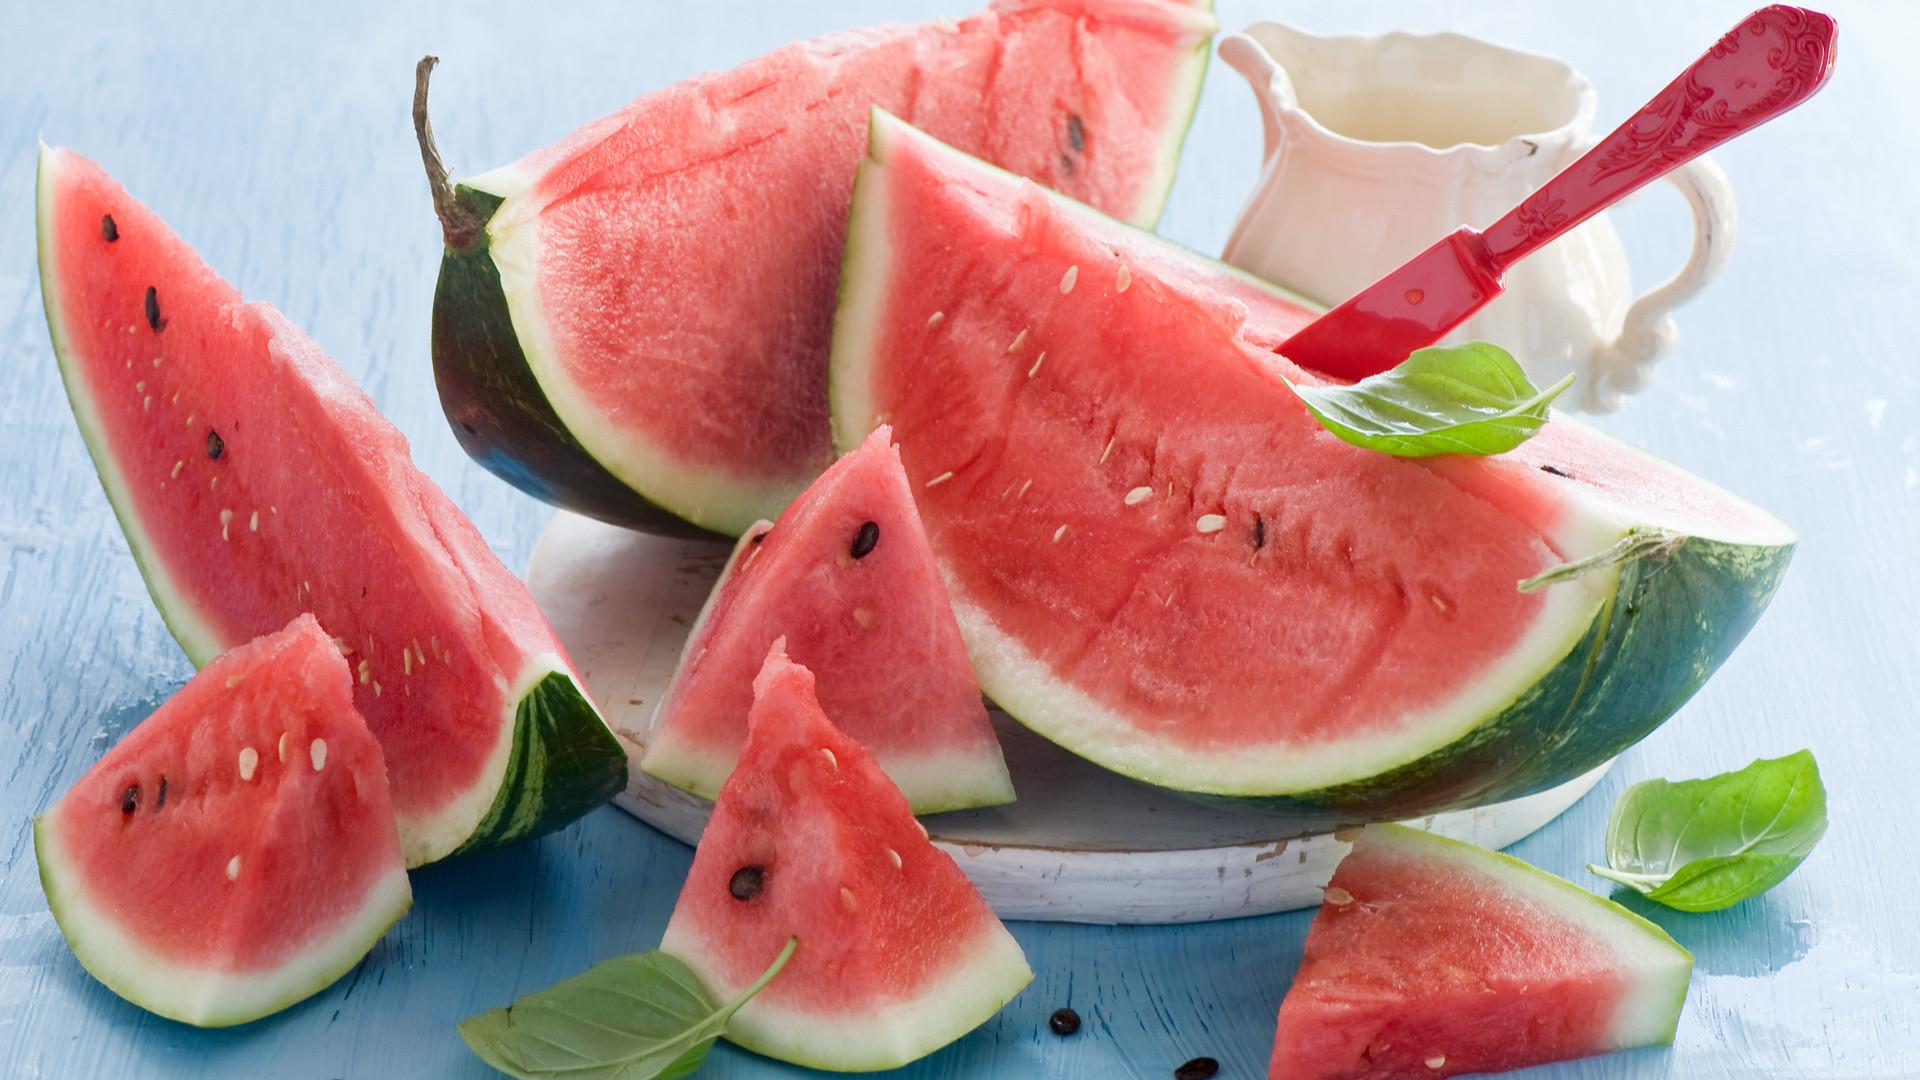 Watermelon Wallpaper for Walls Awesome Watermelon Wallpaper S